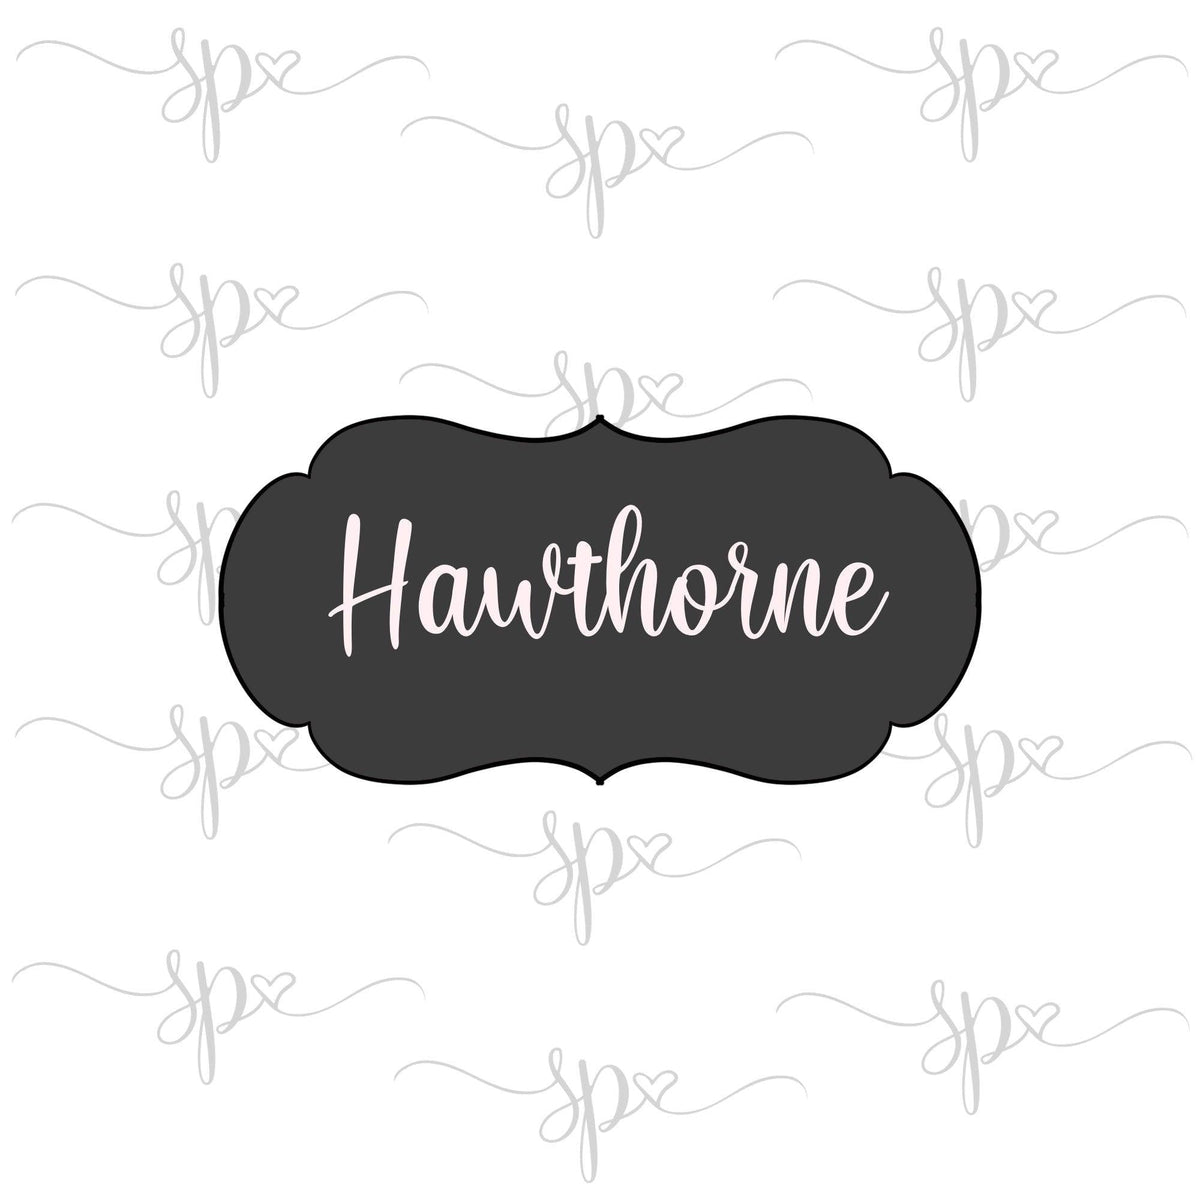 Hawthorne Plaque Cookie Cutter - Sweetleigh 